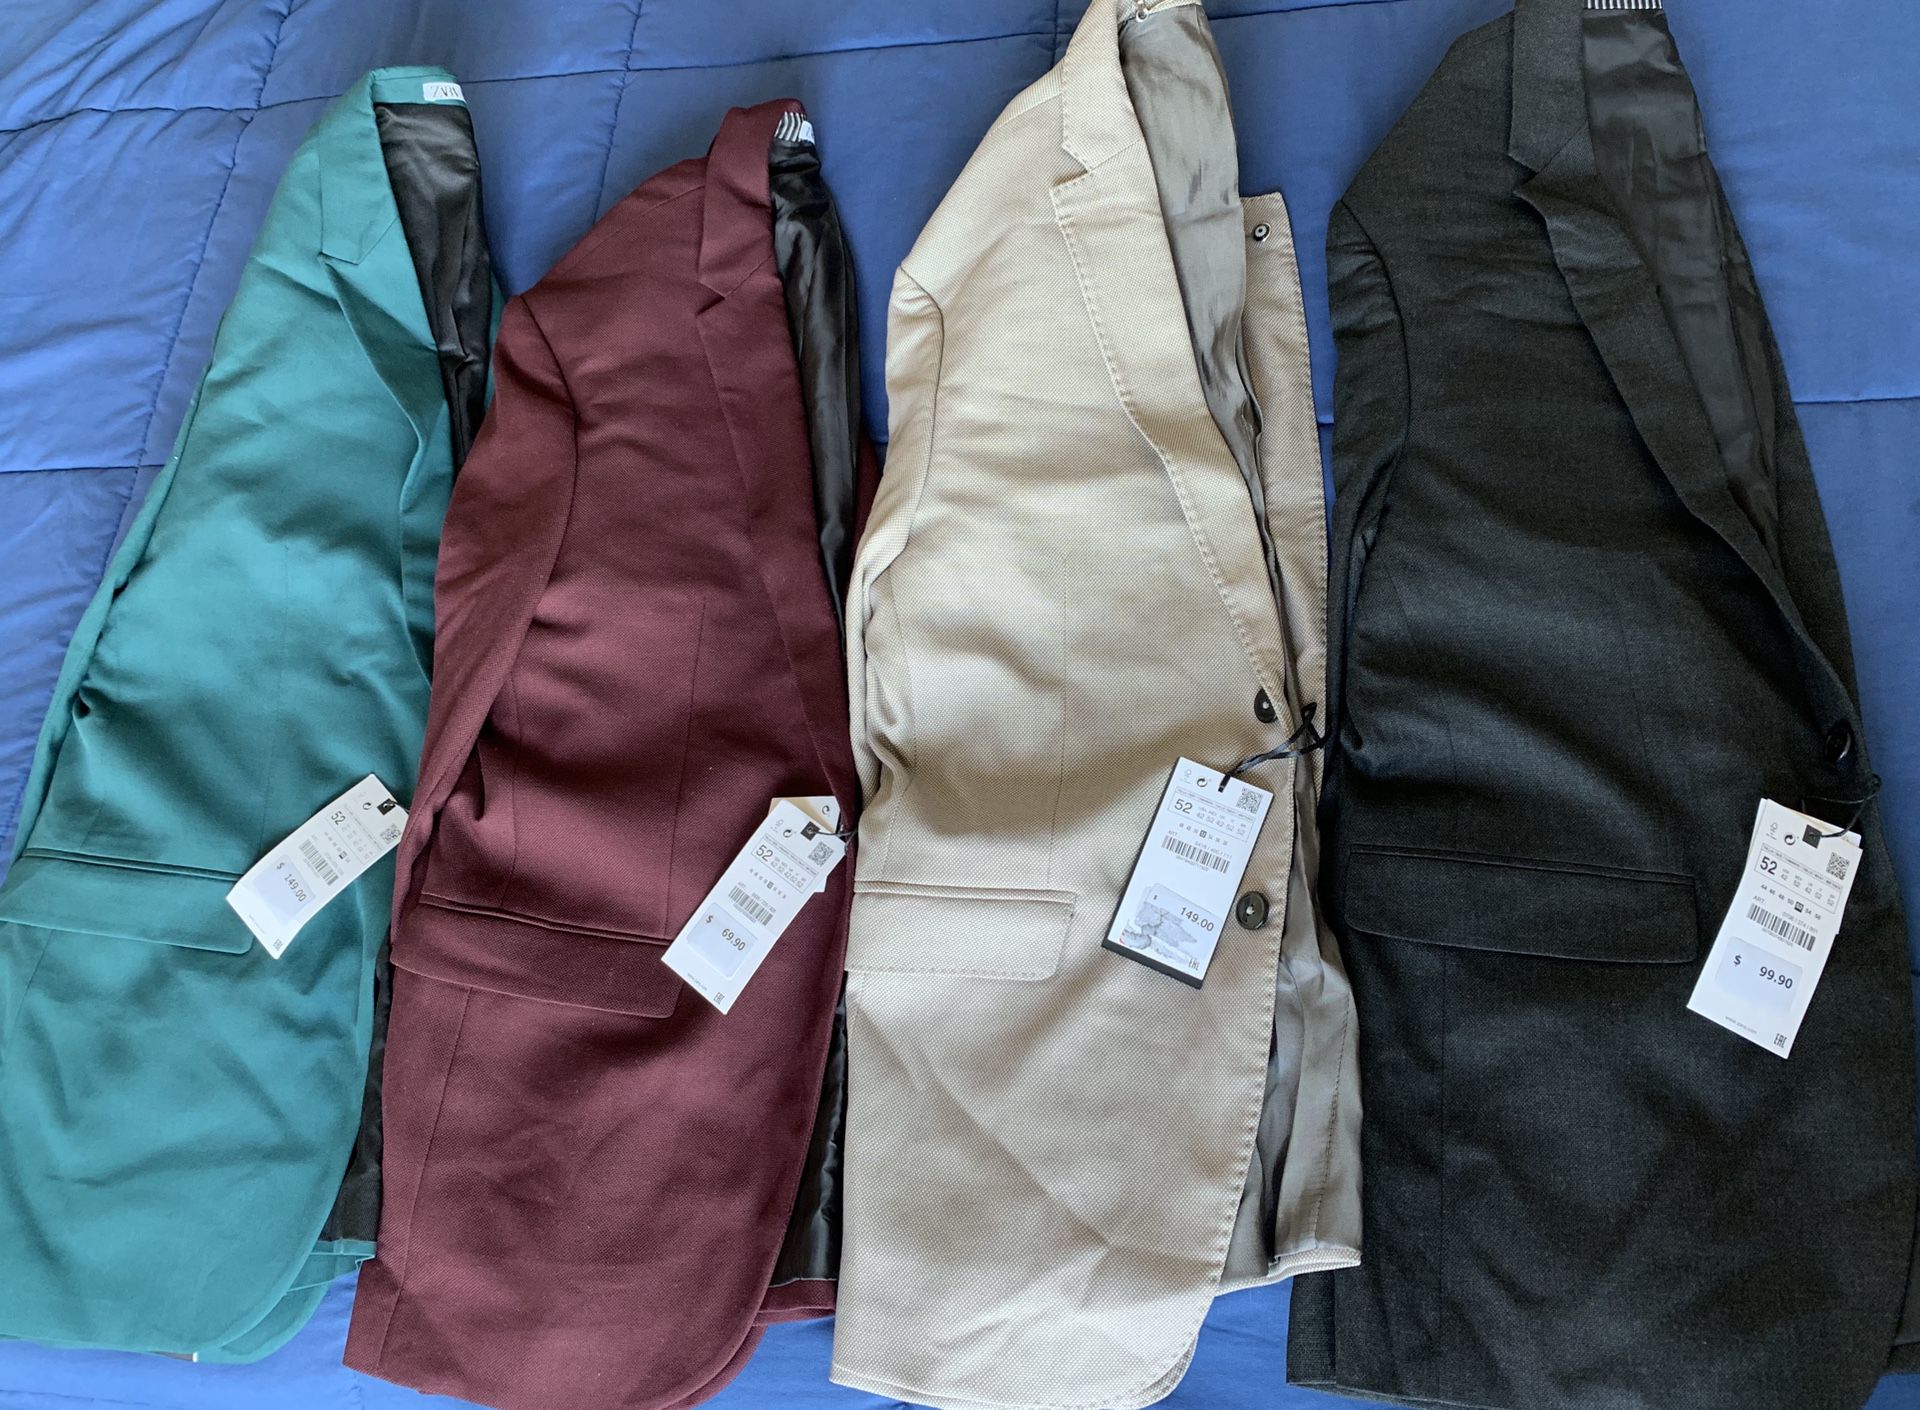 SELL TODAY - Lot of 4 - Men’s BRAND NEW ZARA Jackets sz 42R